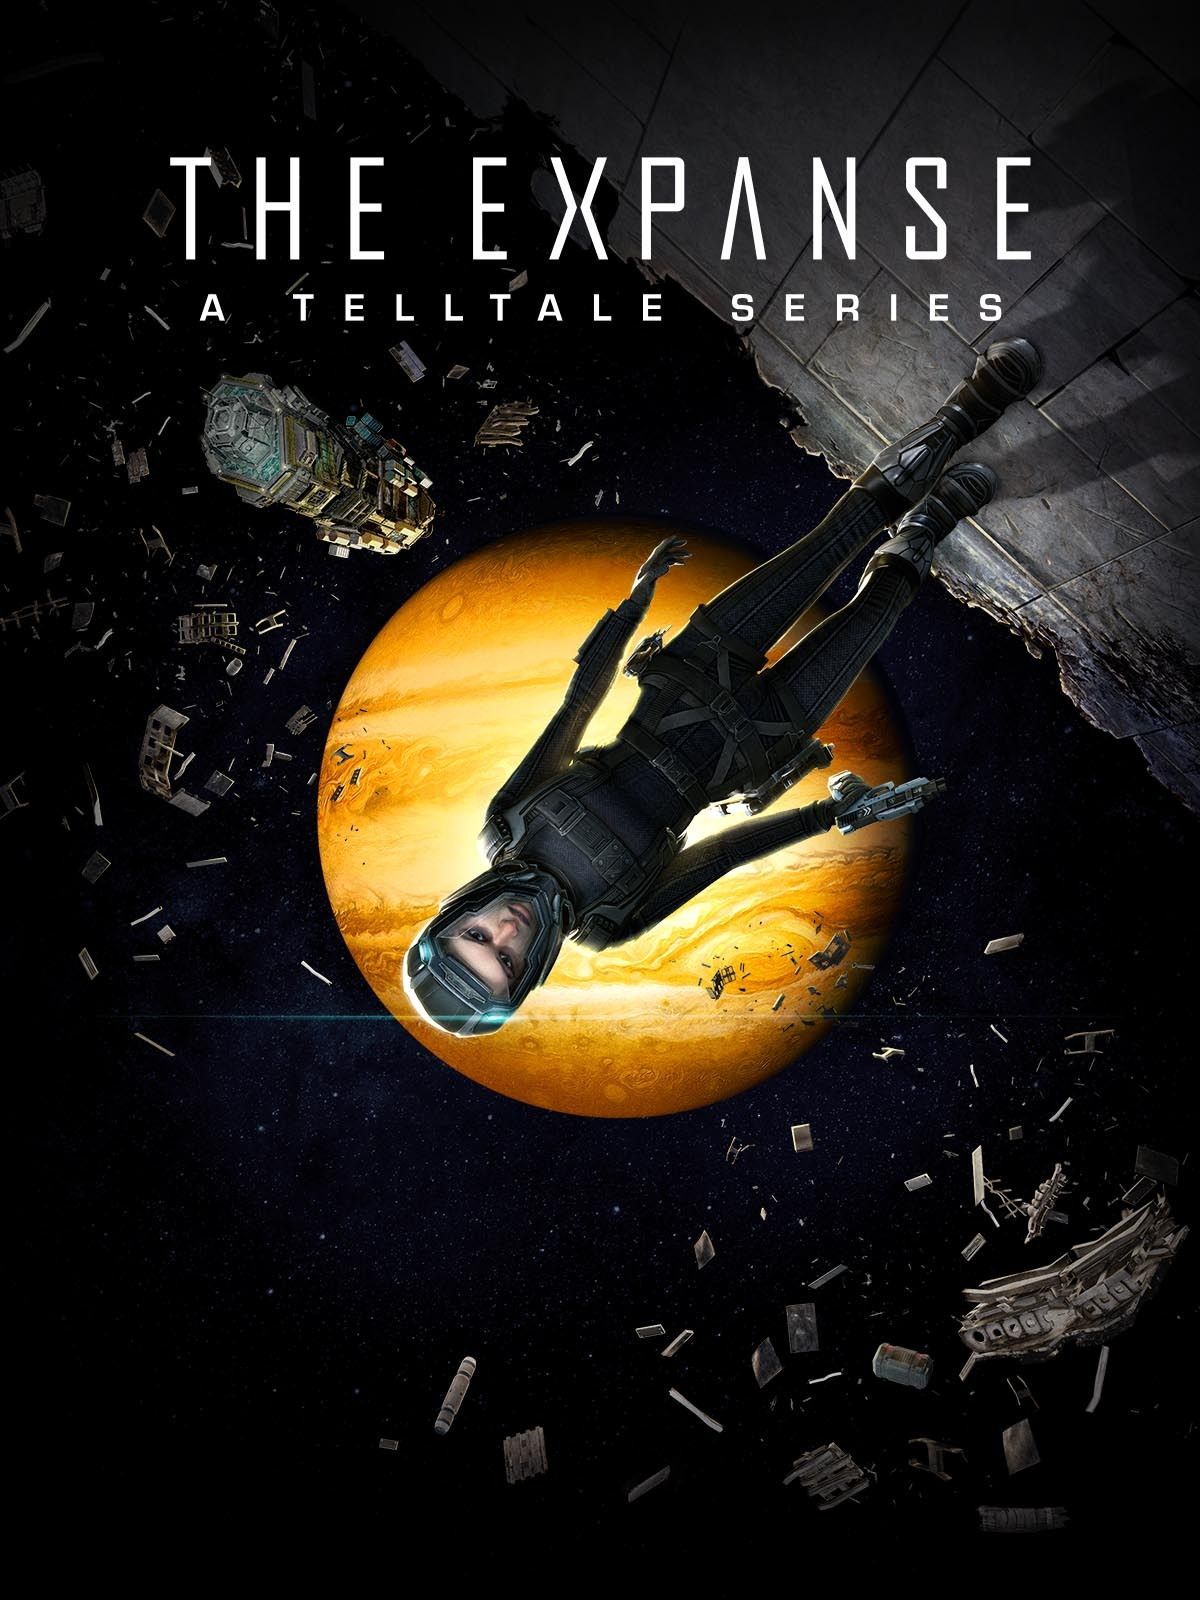 S18 Ep1267: The Expanse: A Telltale Series Interview